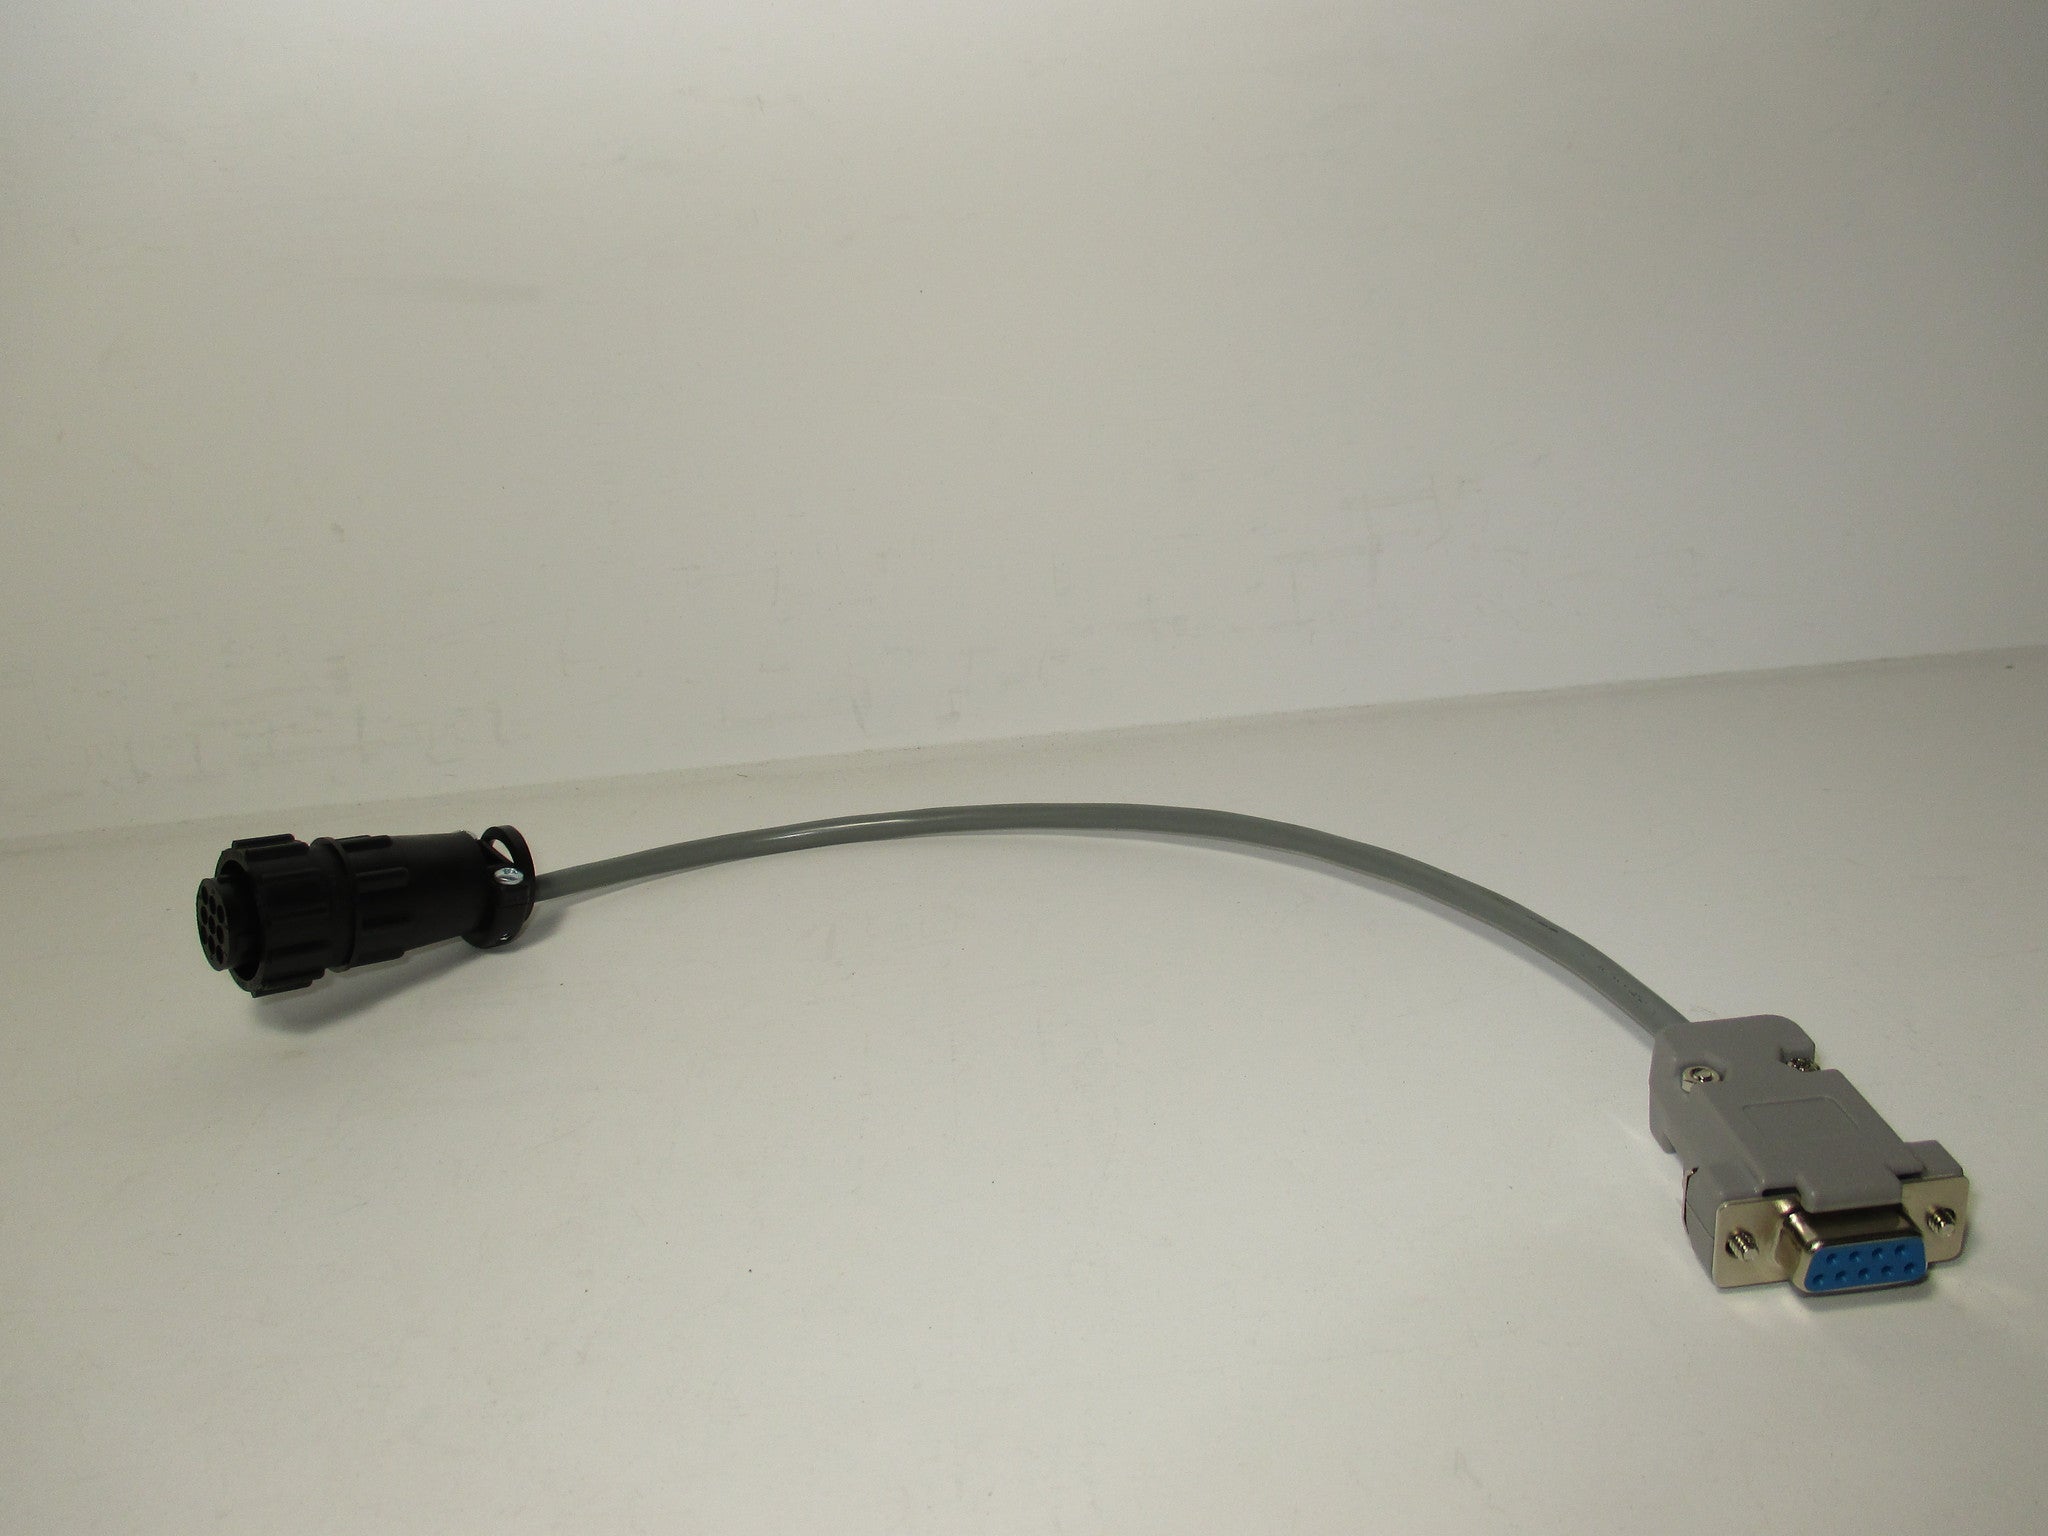 ESP OBDII CAN NULL CABLE, 12", P.N. 10705 6